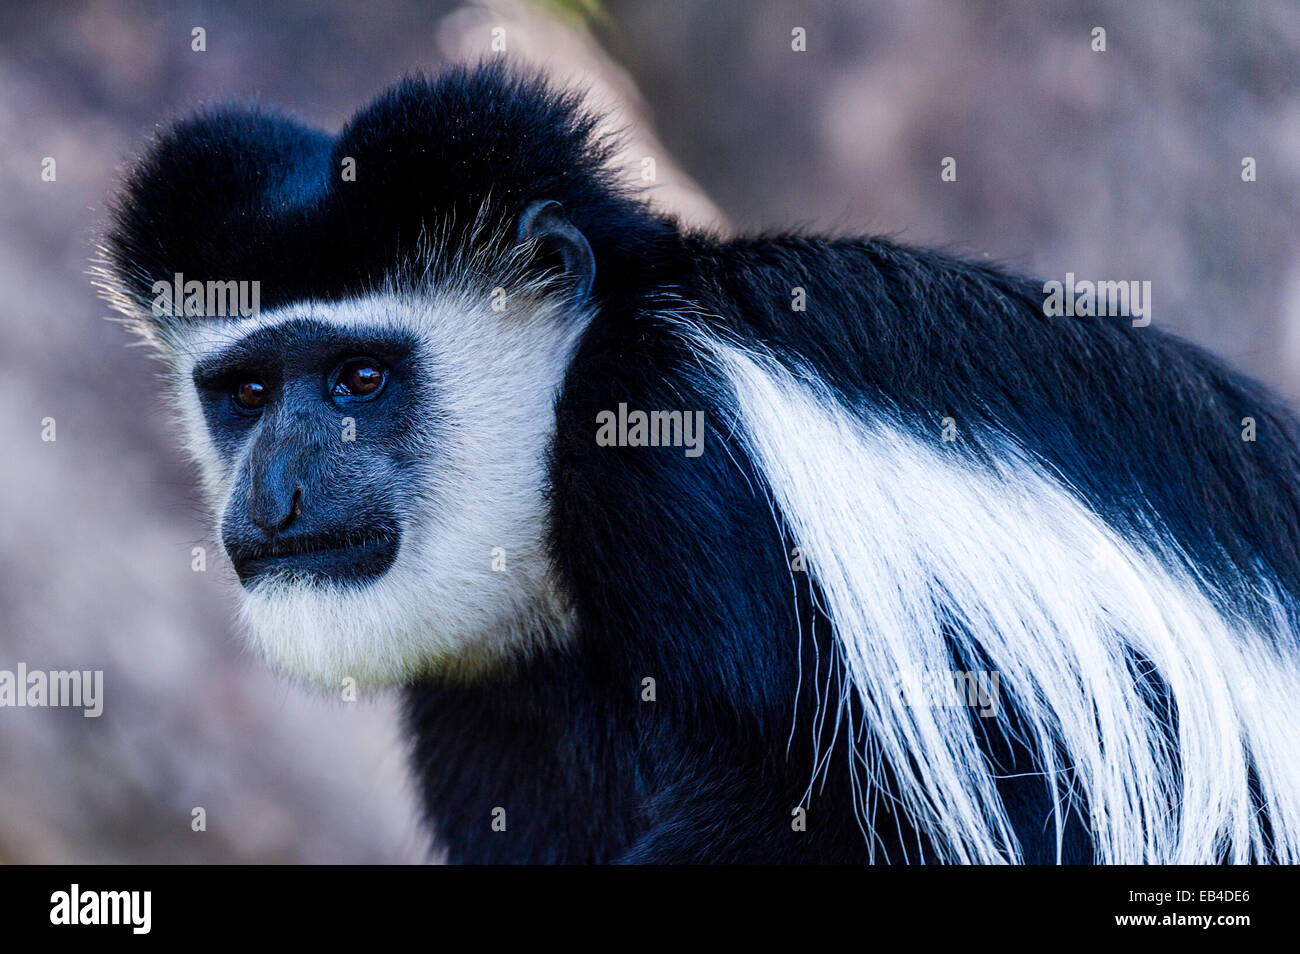 A Black and White Colobus sporting an Elvis Presley hairstyle. Stock Photo